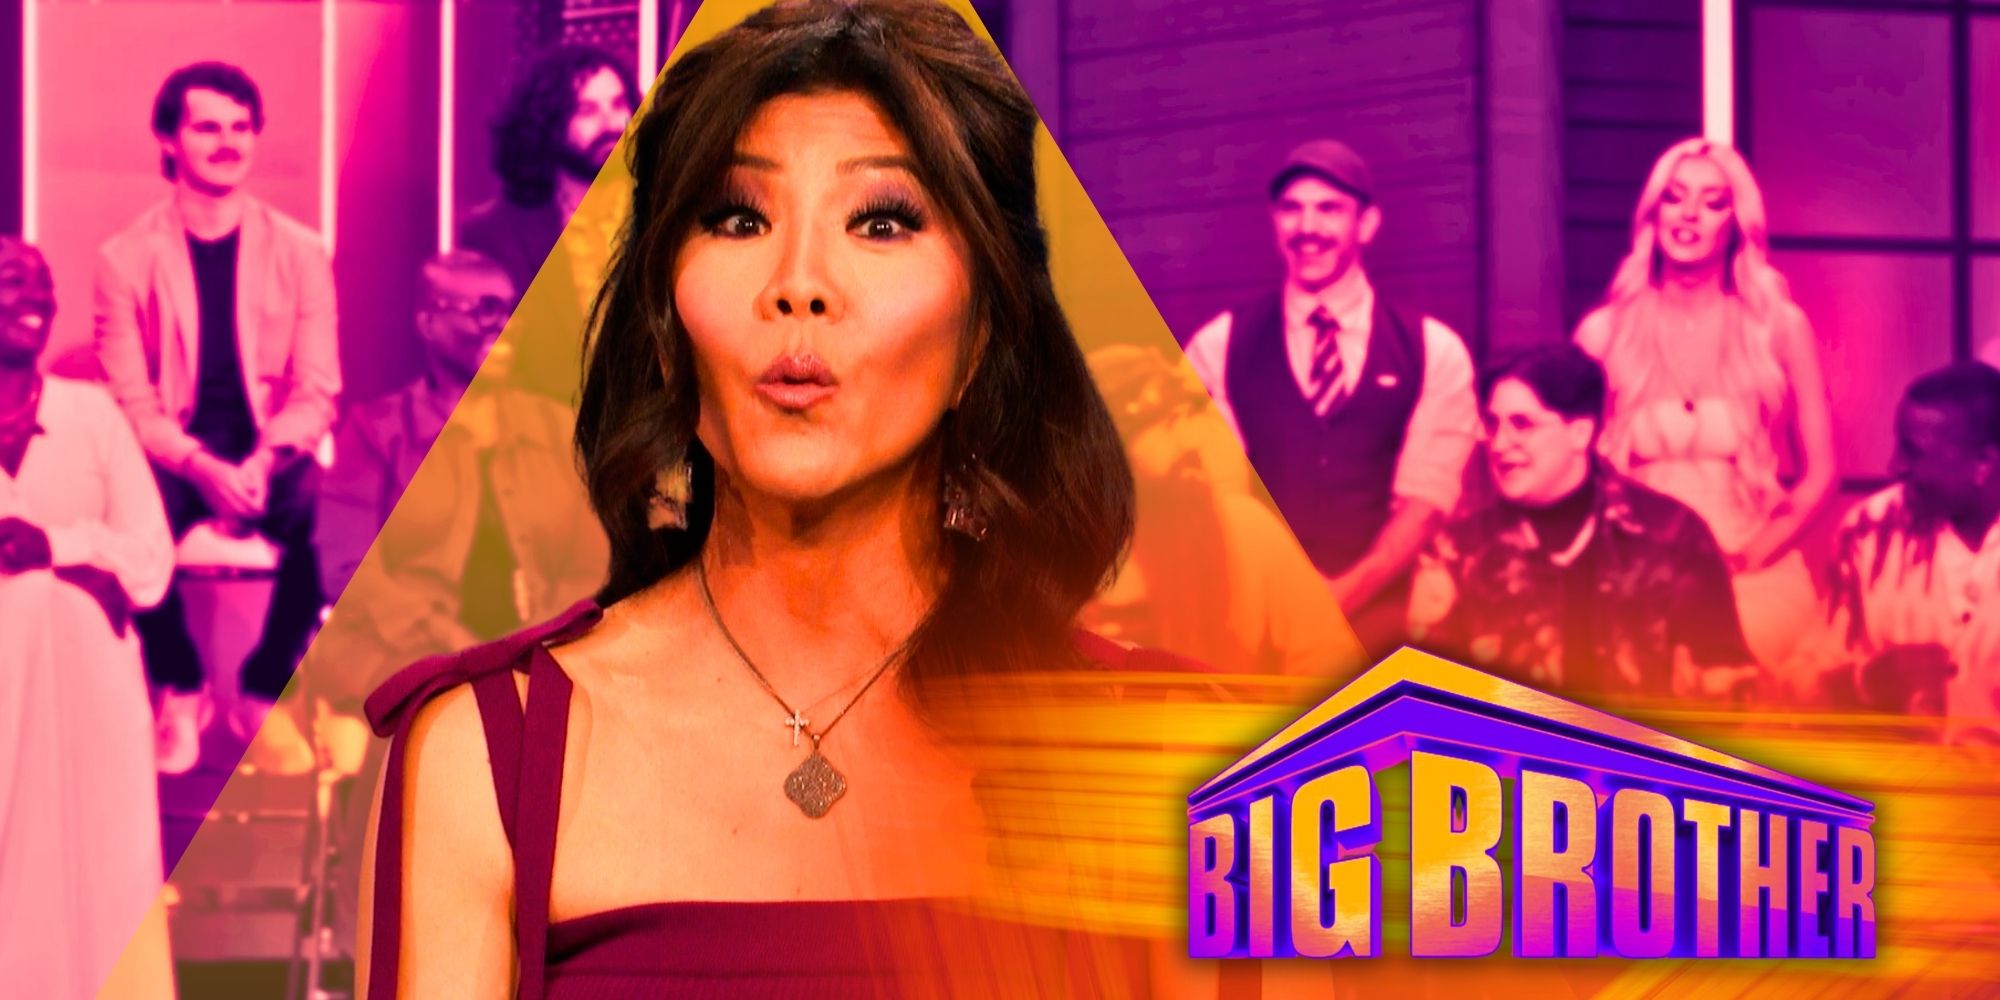 Big brother promo with julie chen